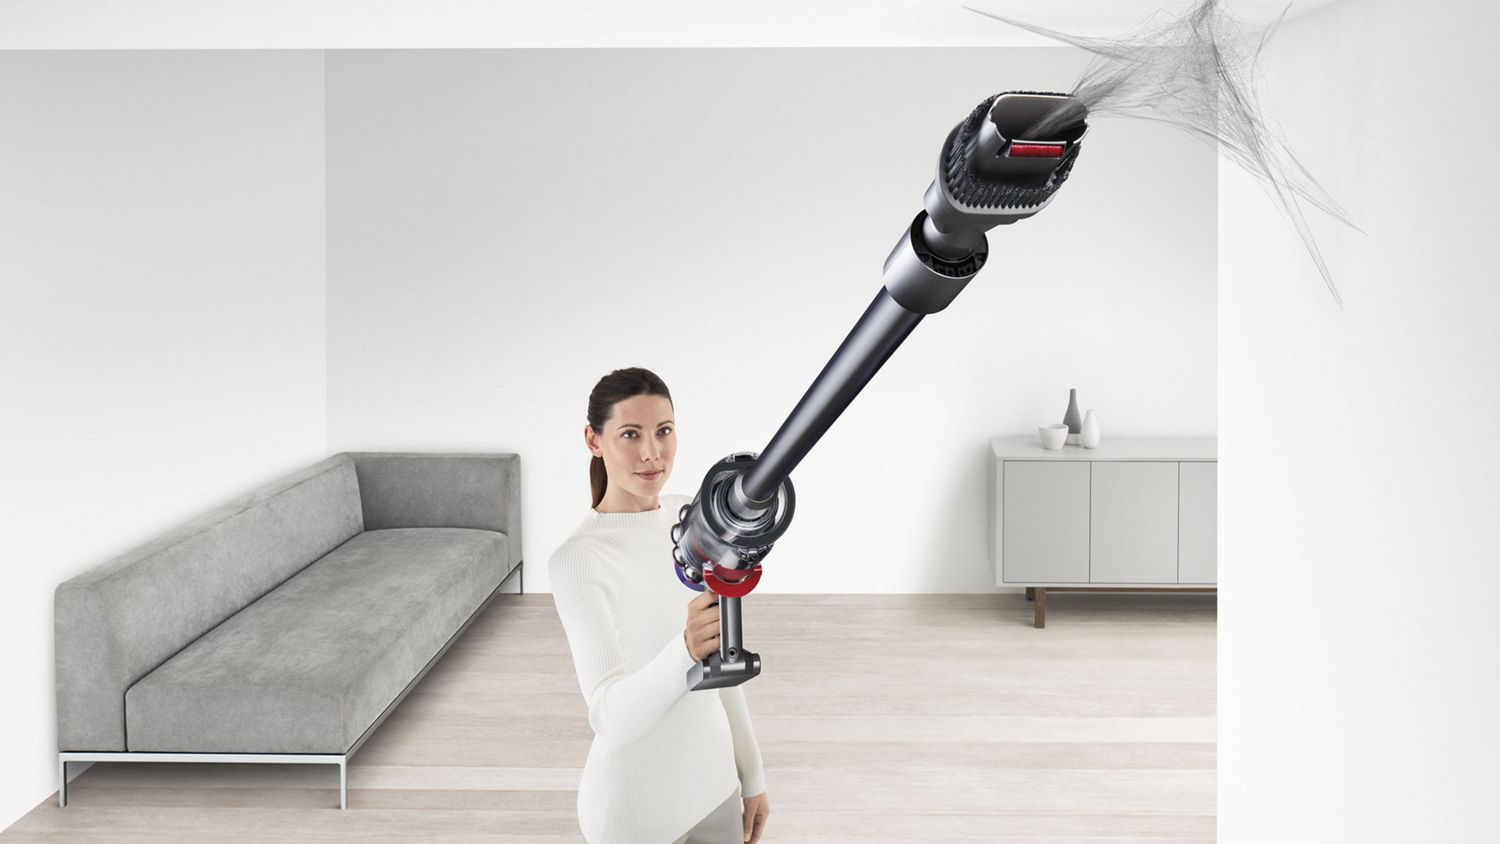 Cyclone V10 Absolute cordless vacuum (Nickel/Copper) | Dyson Canada